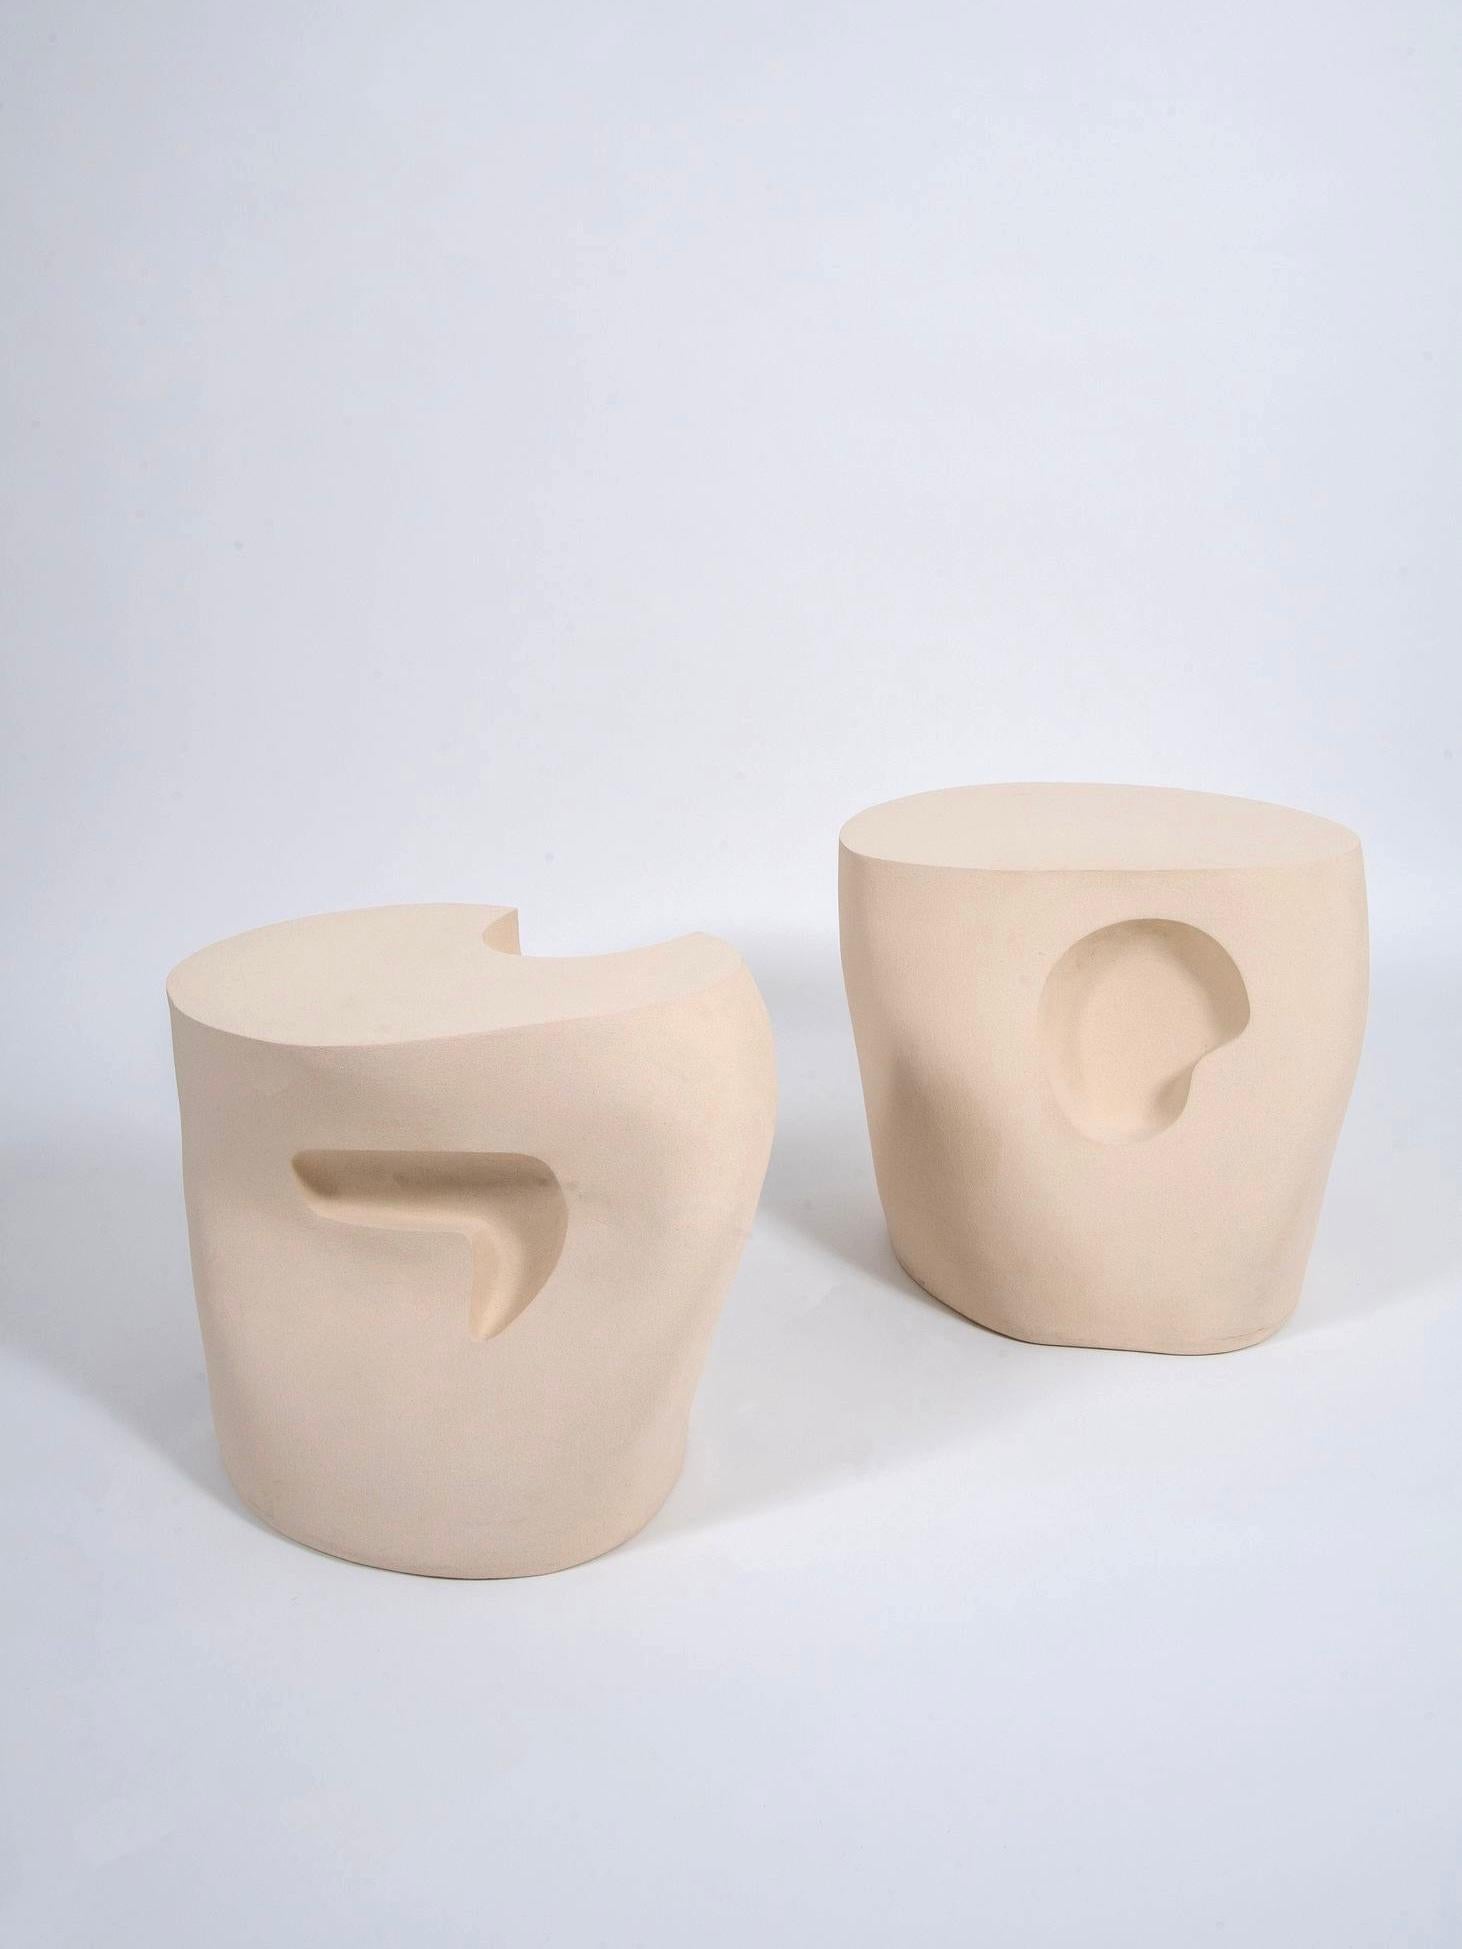 Ceramic side tables by Manon Oller.
Material: White stoneware.
Dimensions: H 48 x ø 59 cm.
Year: 2022.
Unique pieces handmade in France, bespoke size and material upon request.

These side tables take their inspiration from Mediterranean